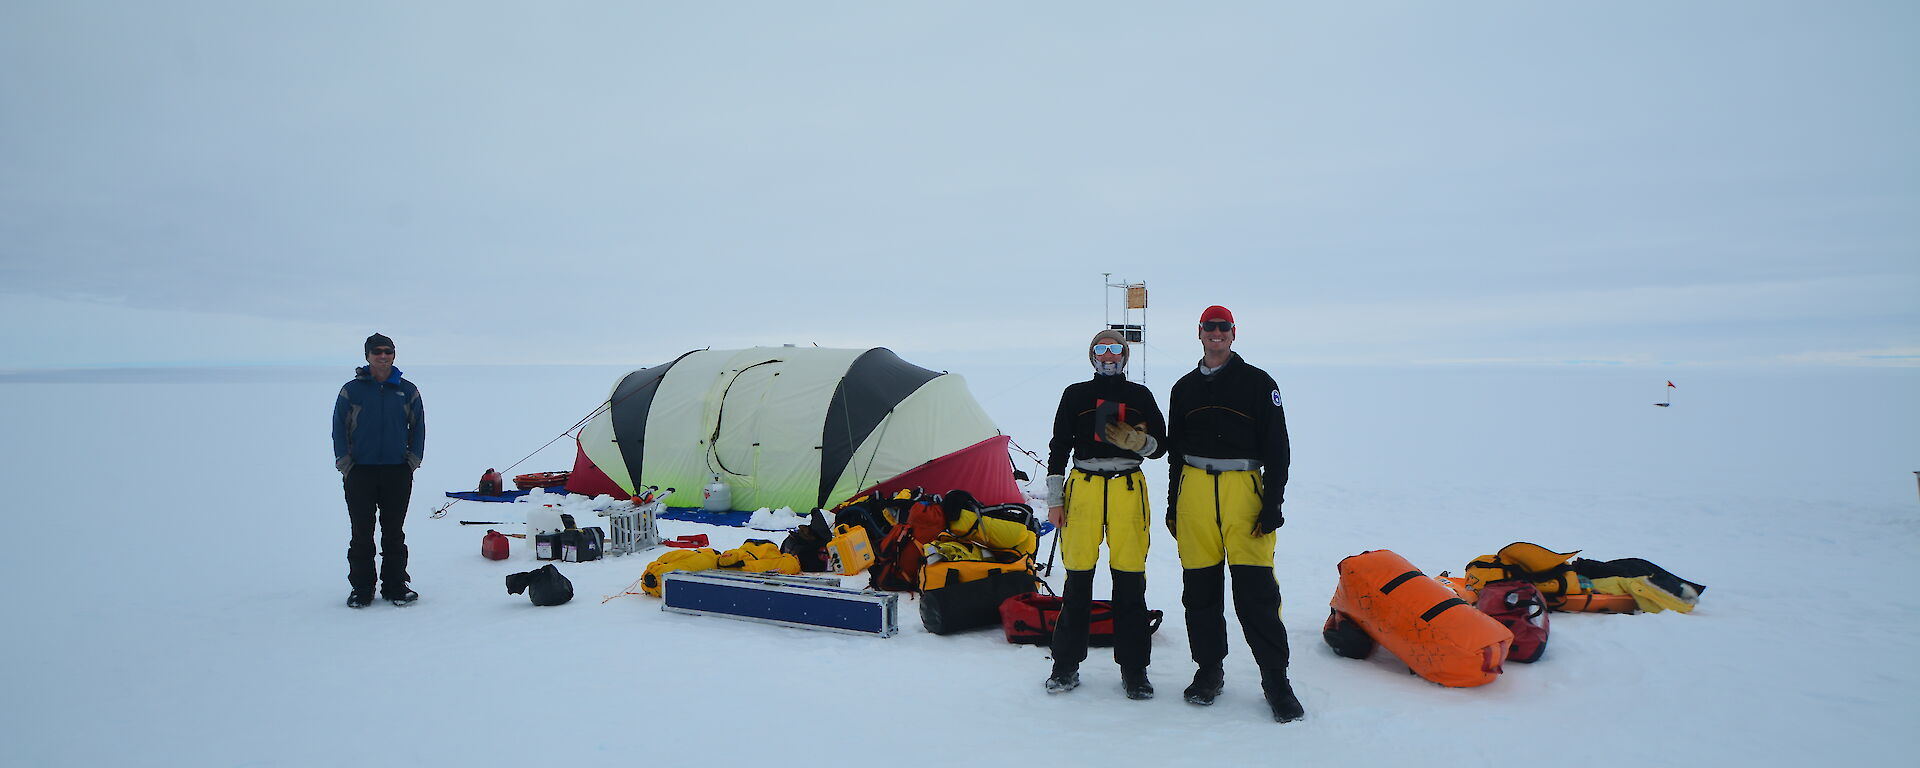 A tent, expeditioners and field equipment littering the snow on flat expanse of glacier